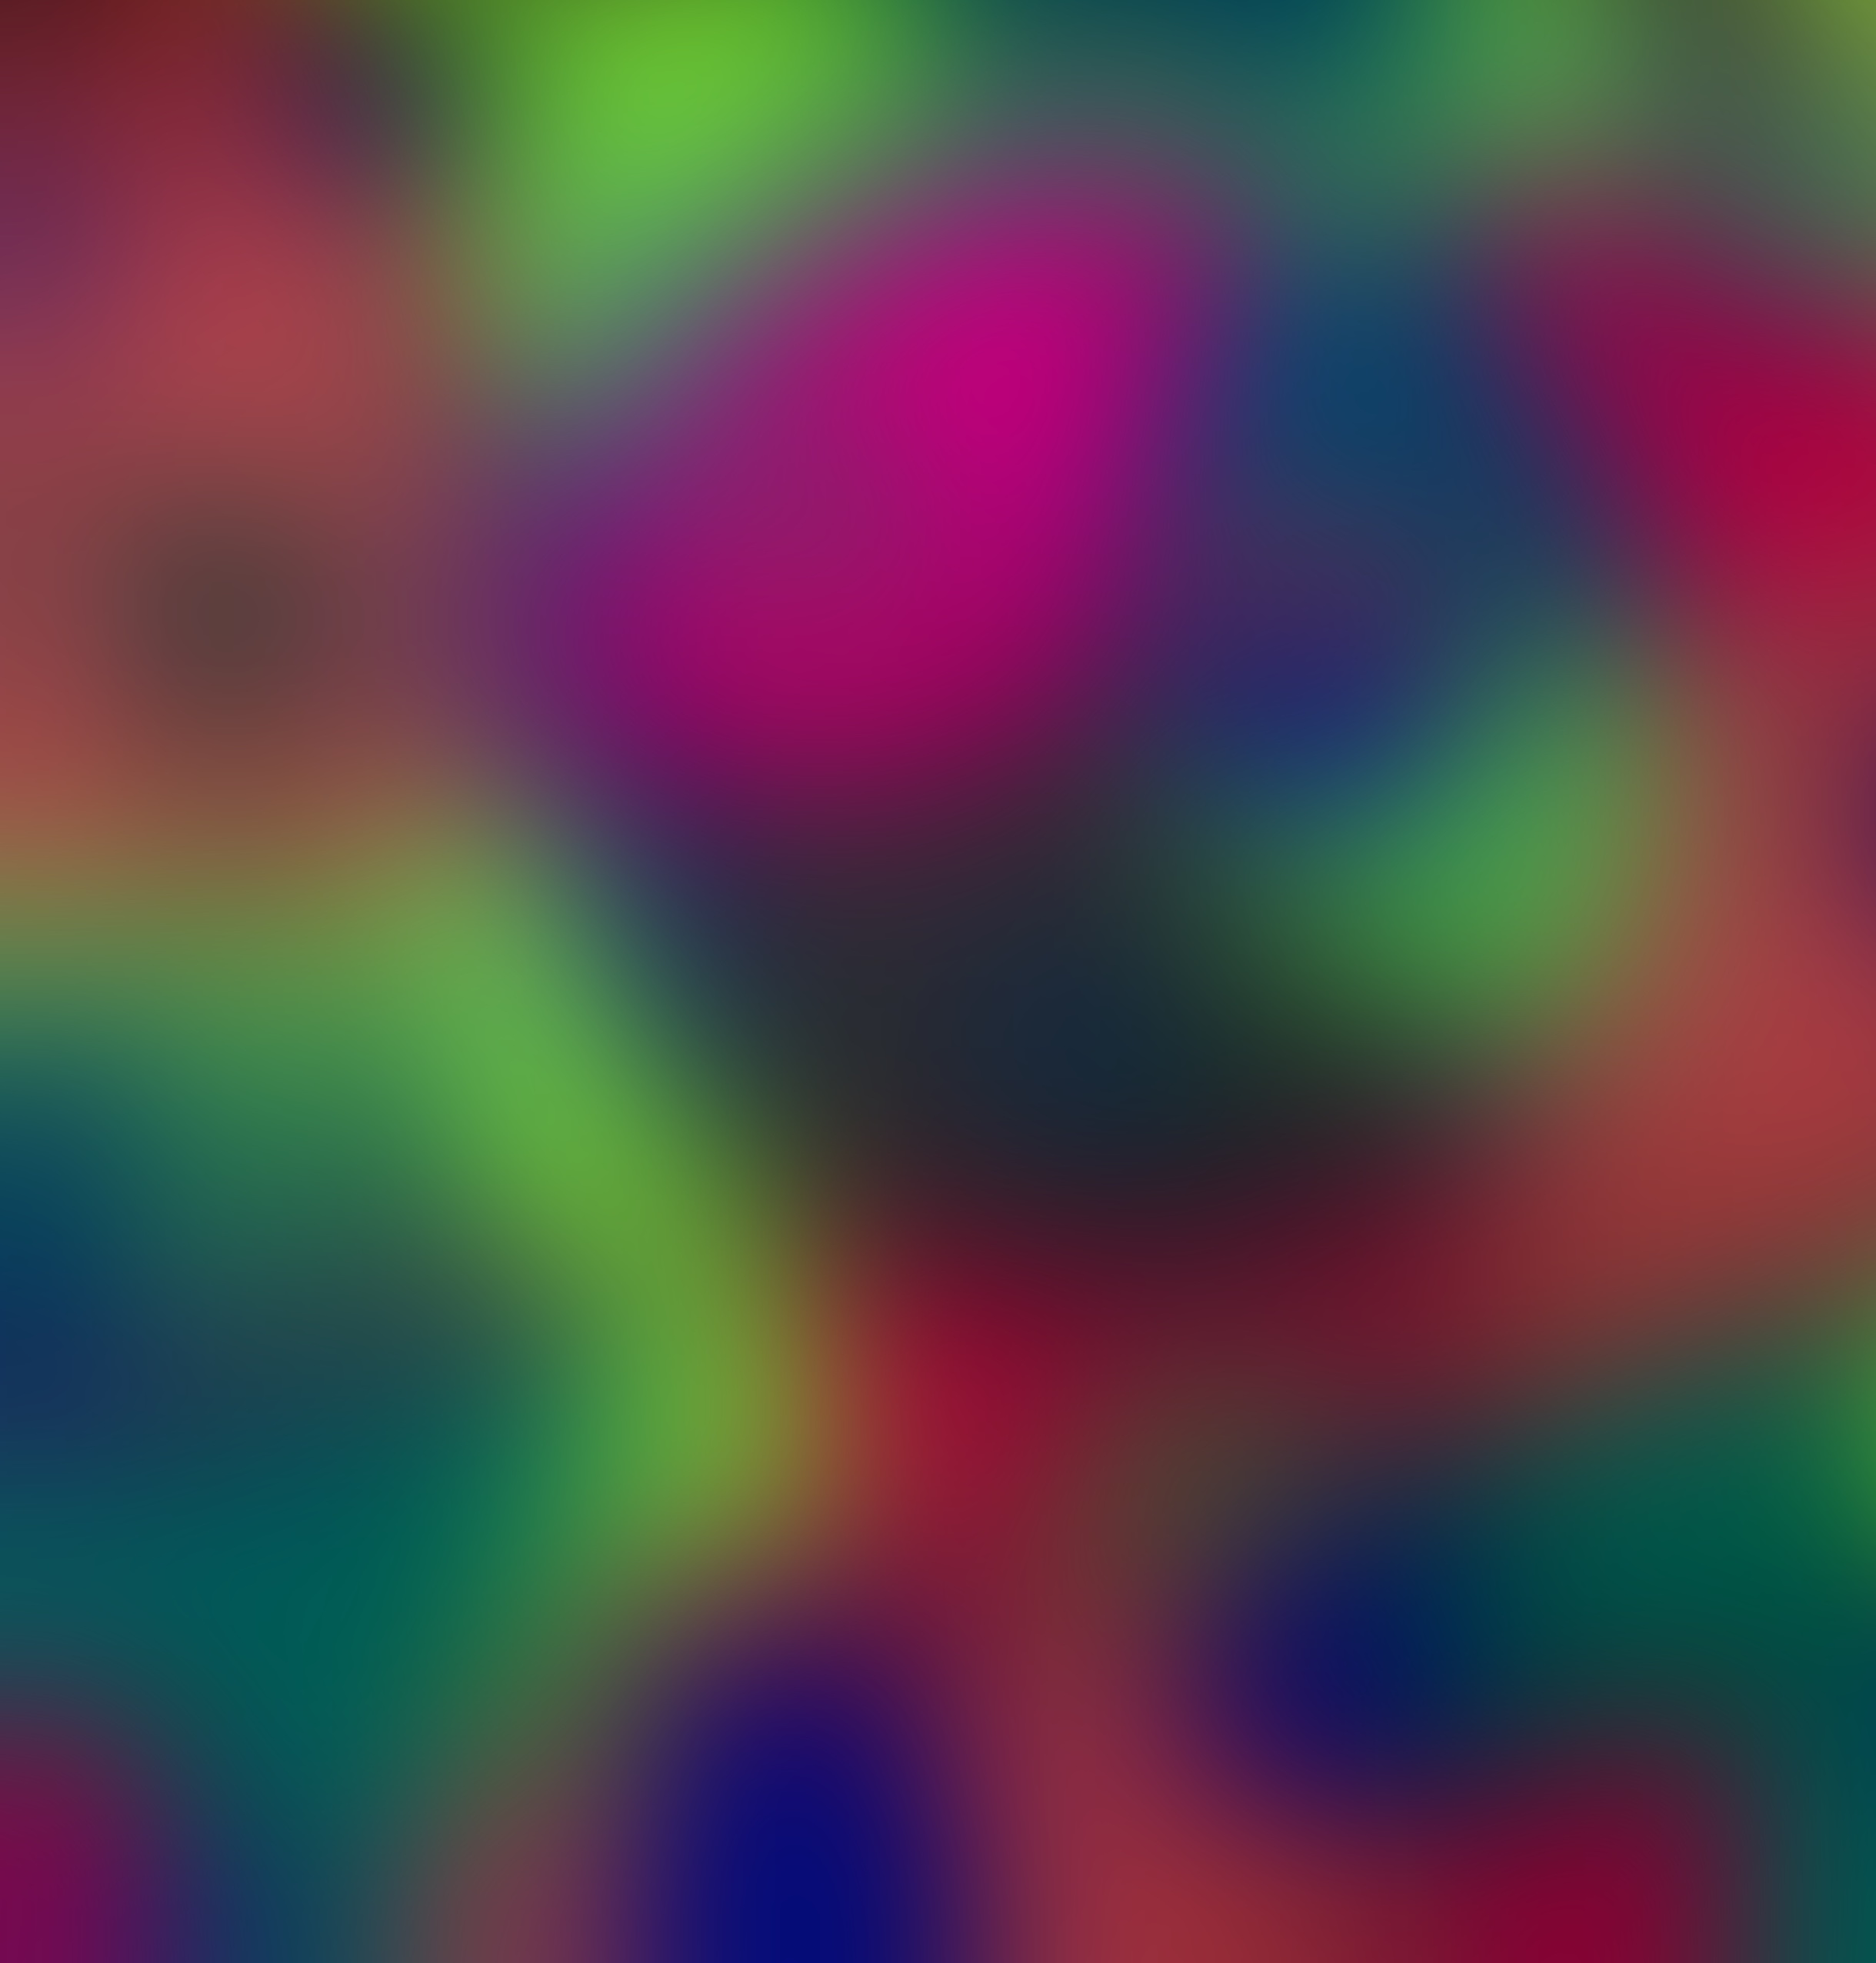 Colorful blurry abstract background photo